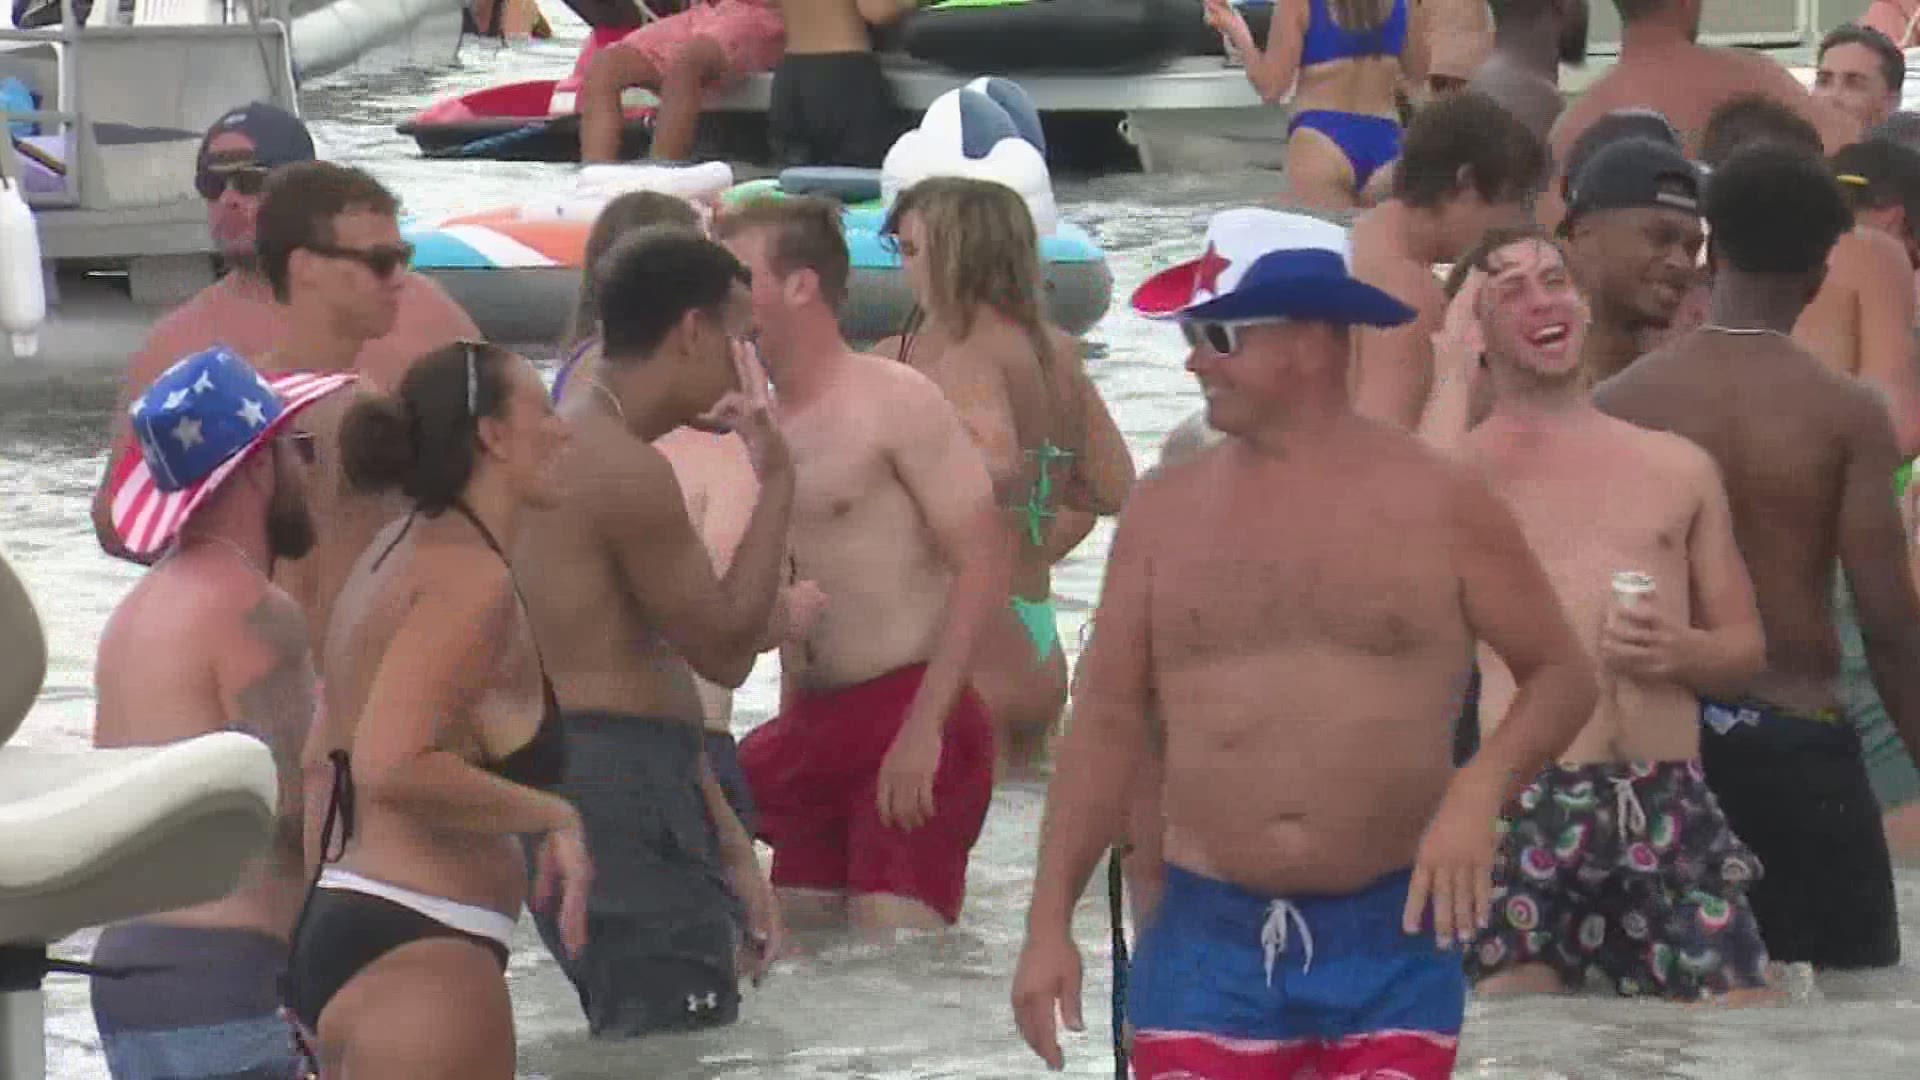 Around 150 people were on the sandbar in Cass County, many seen without masks and not following social distancing guidelines.